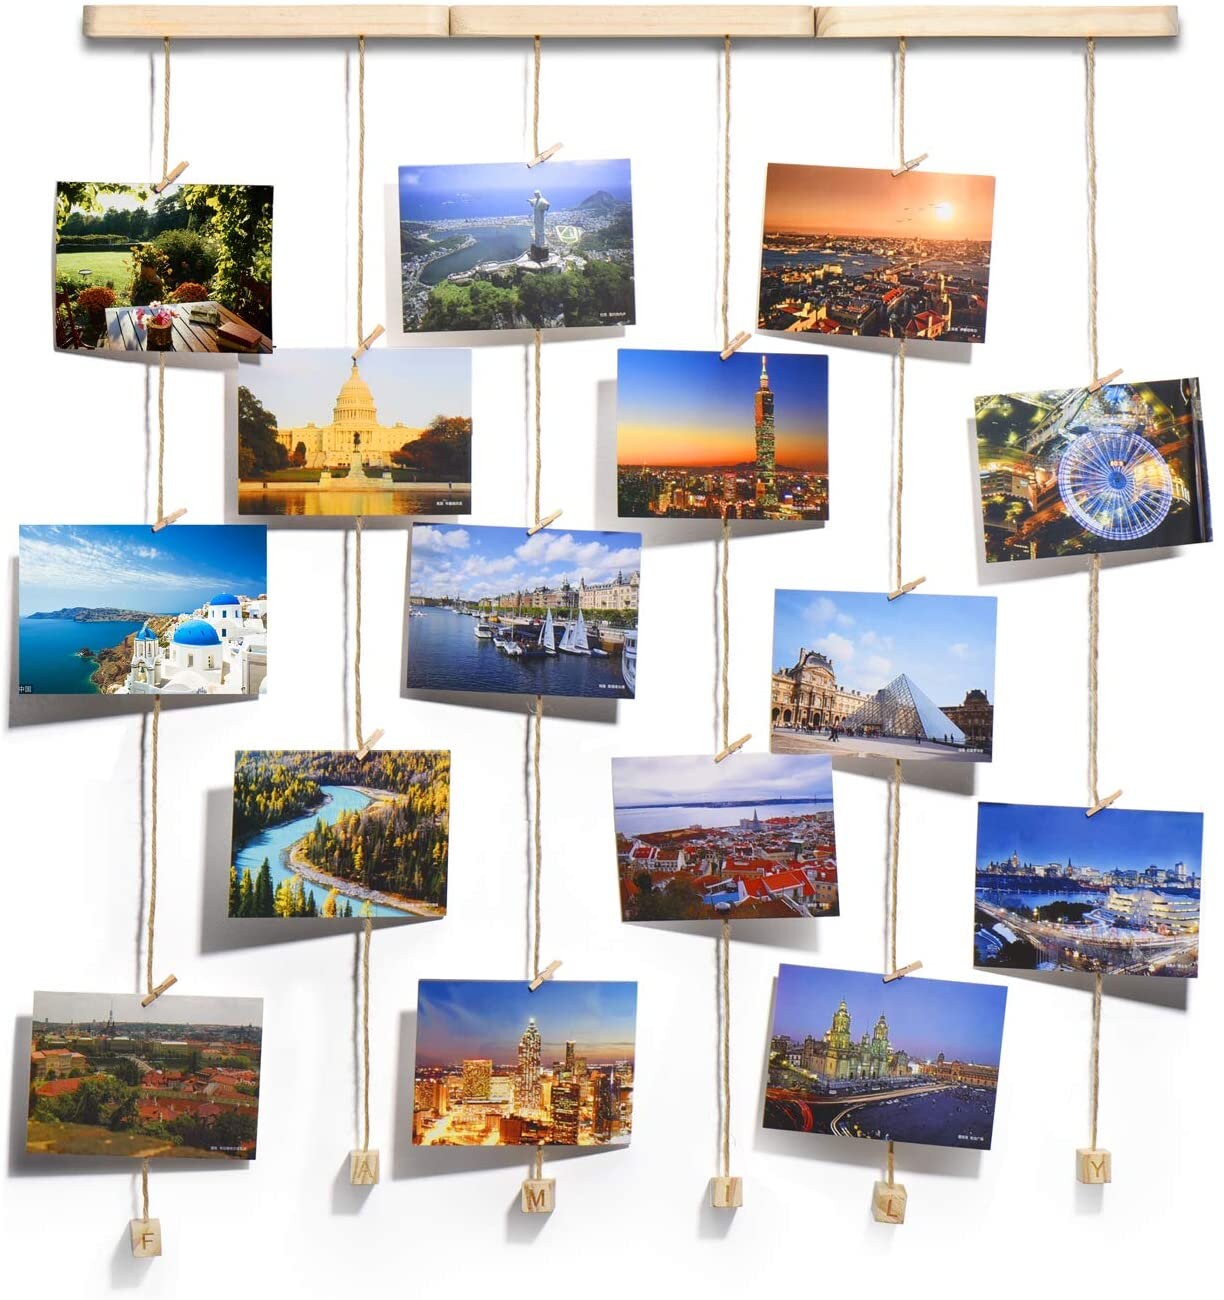 Details about   Wood Picture Photo Frame Wall Decor Clips Twines Collage Artwork Hanging Display 